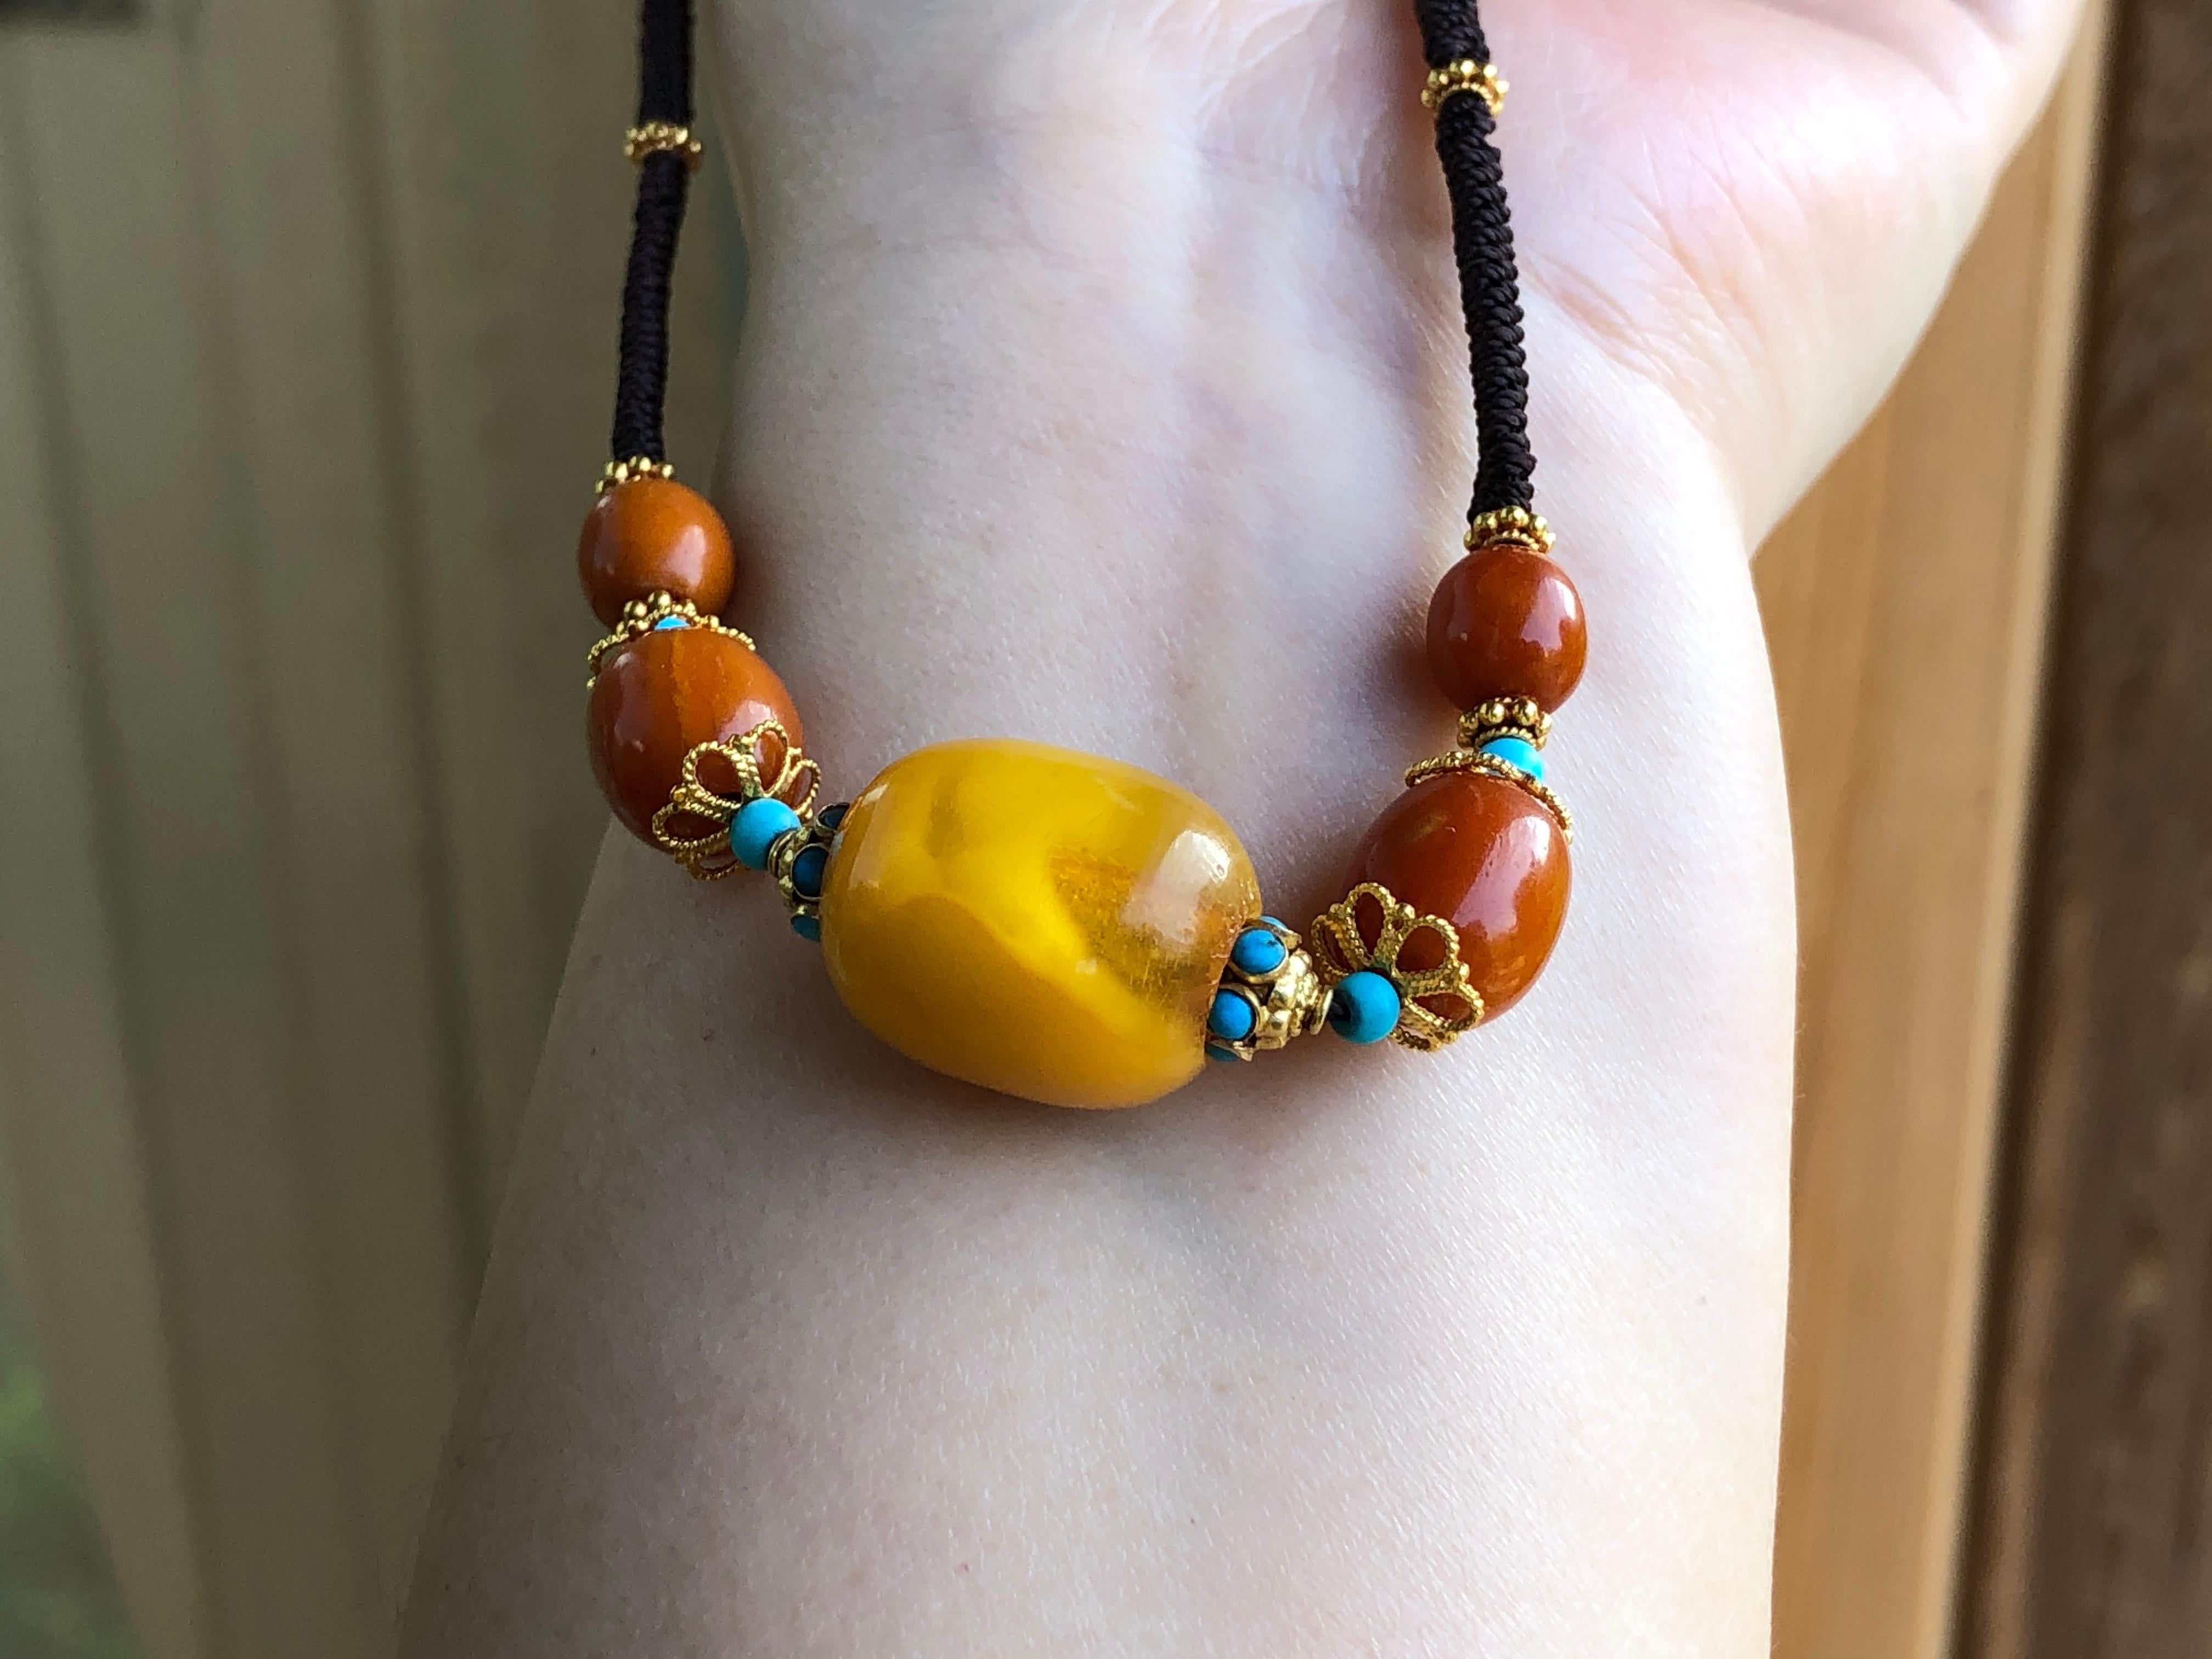 This amber, gold and turquoise necklace is a collection of eye catching contrasts. First there are the colours; the two tones of amber against the black string and the lighter turquoise. Then there is the design. The main focus is the large, bold